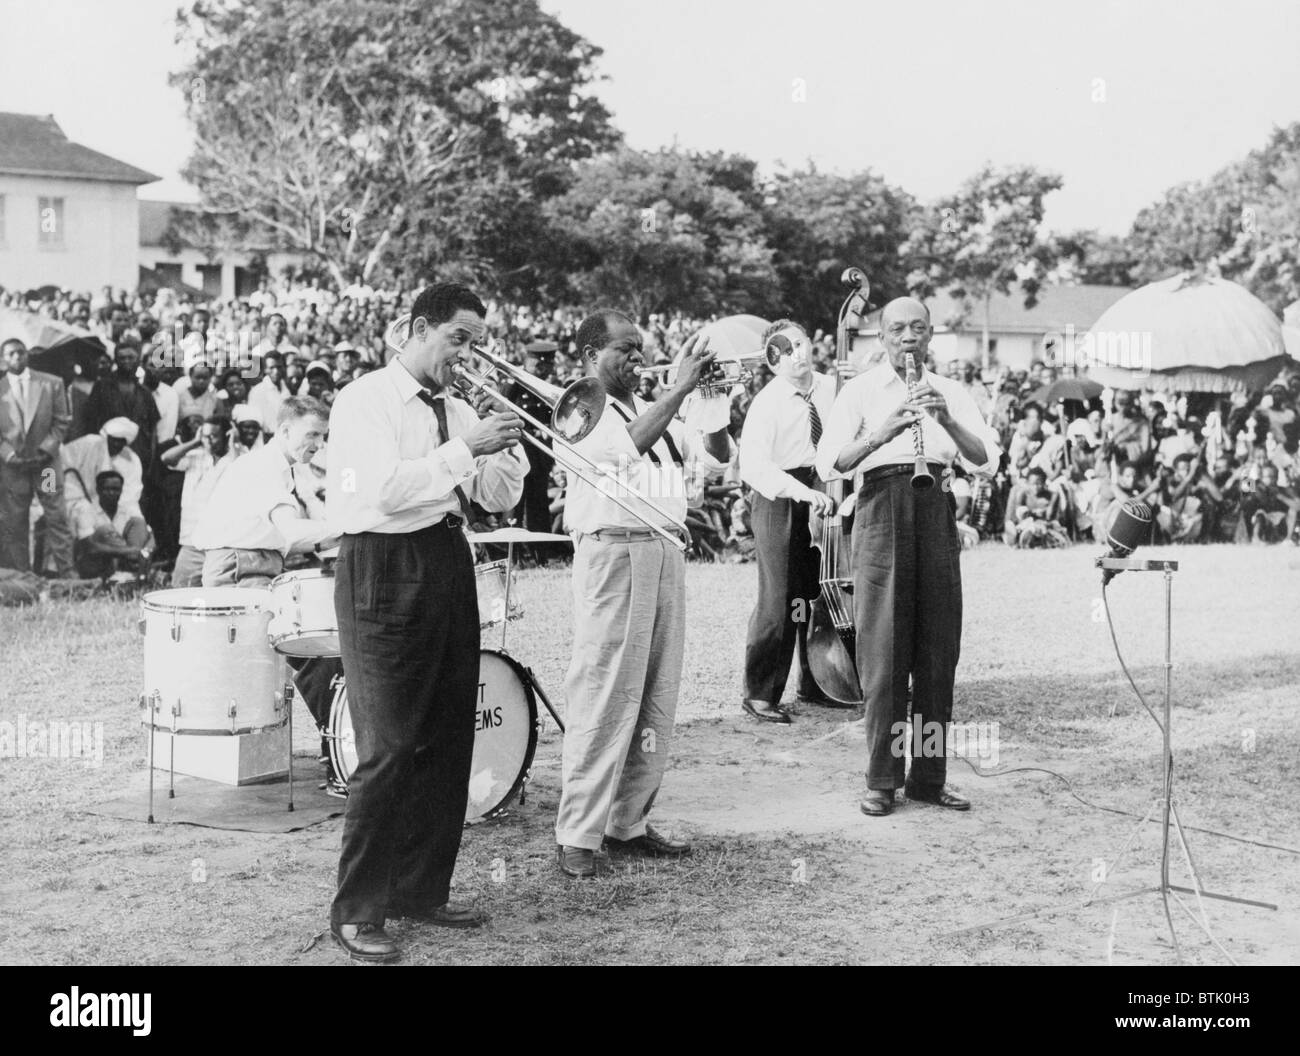 Louis Armstrong (1901-1971), African American Jazz musician, playing trumpet with band at an outdoor gathering in Africa, 1956. Stock Photo